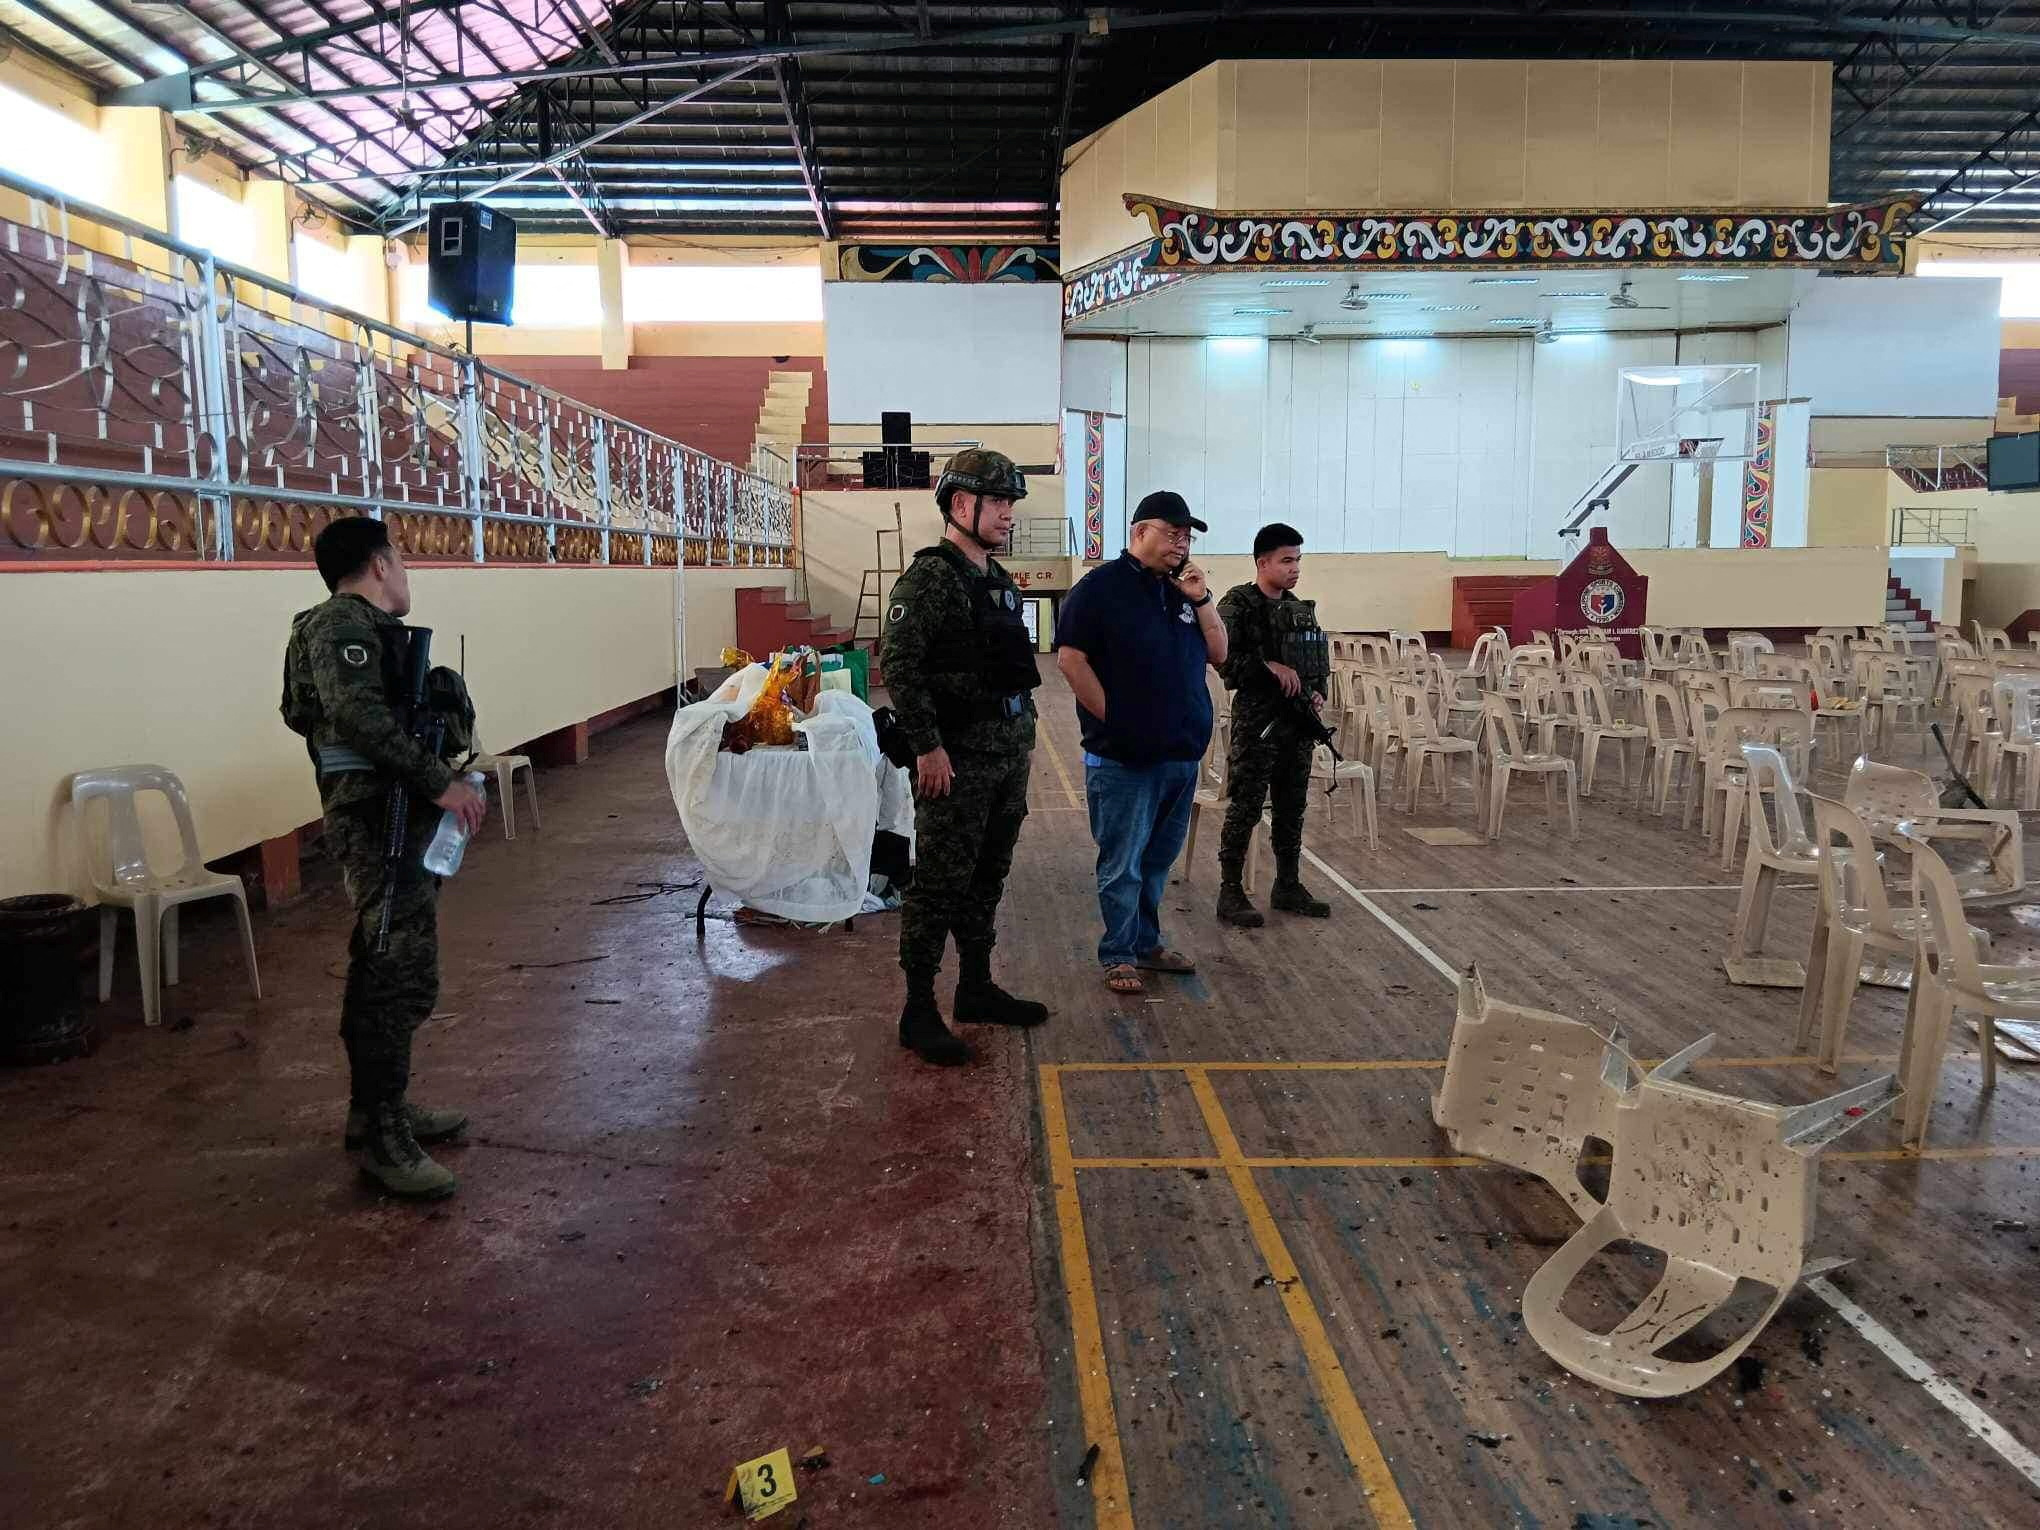 Aftermath of explosion during a Catholic Mass at Mindanao State University in Marawi